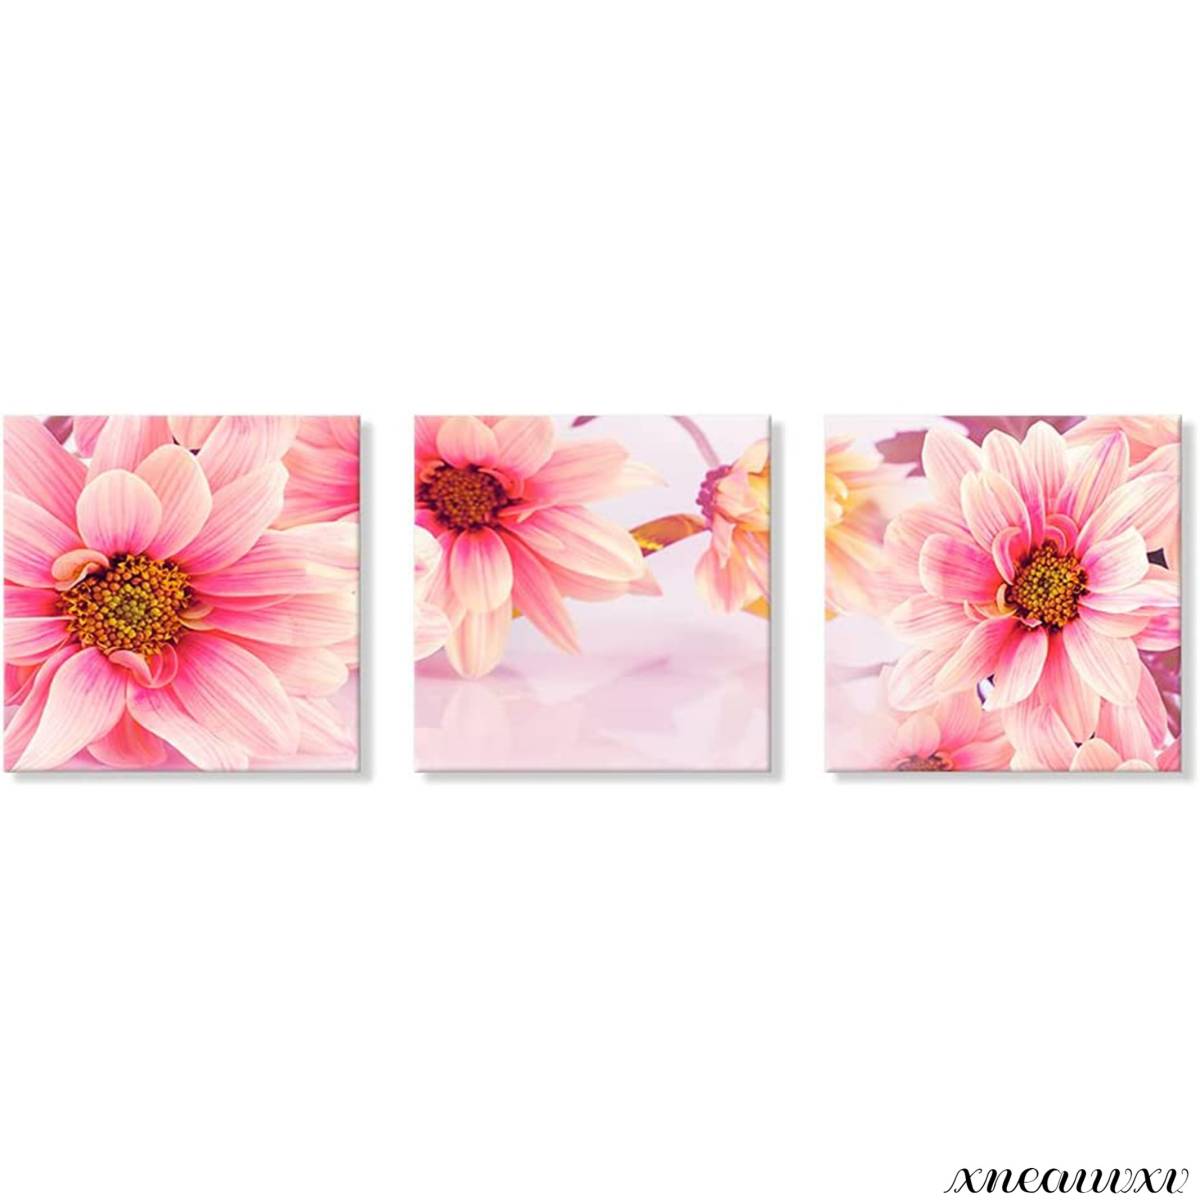 Pink flowers, art panel, plants, nature, interior, wall hanging, room decoration, decoration, canvas, painting, stylish, art, appreciation, redecoration, interior, room, Artwork, Painting, graphic